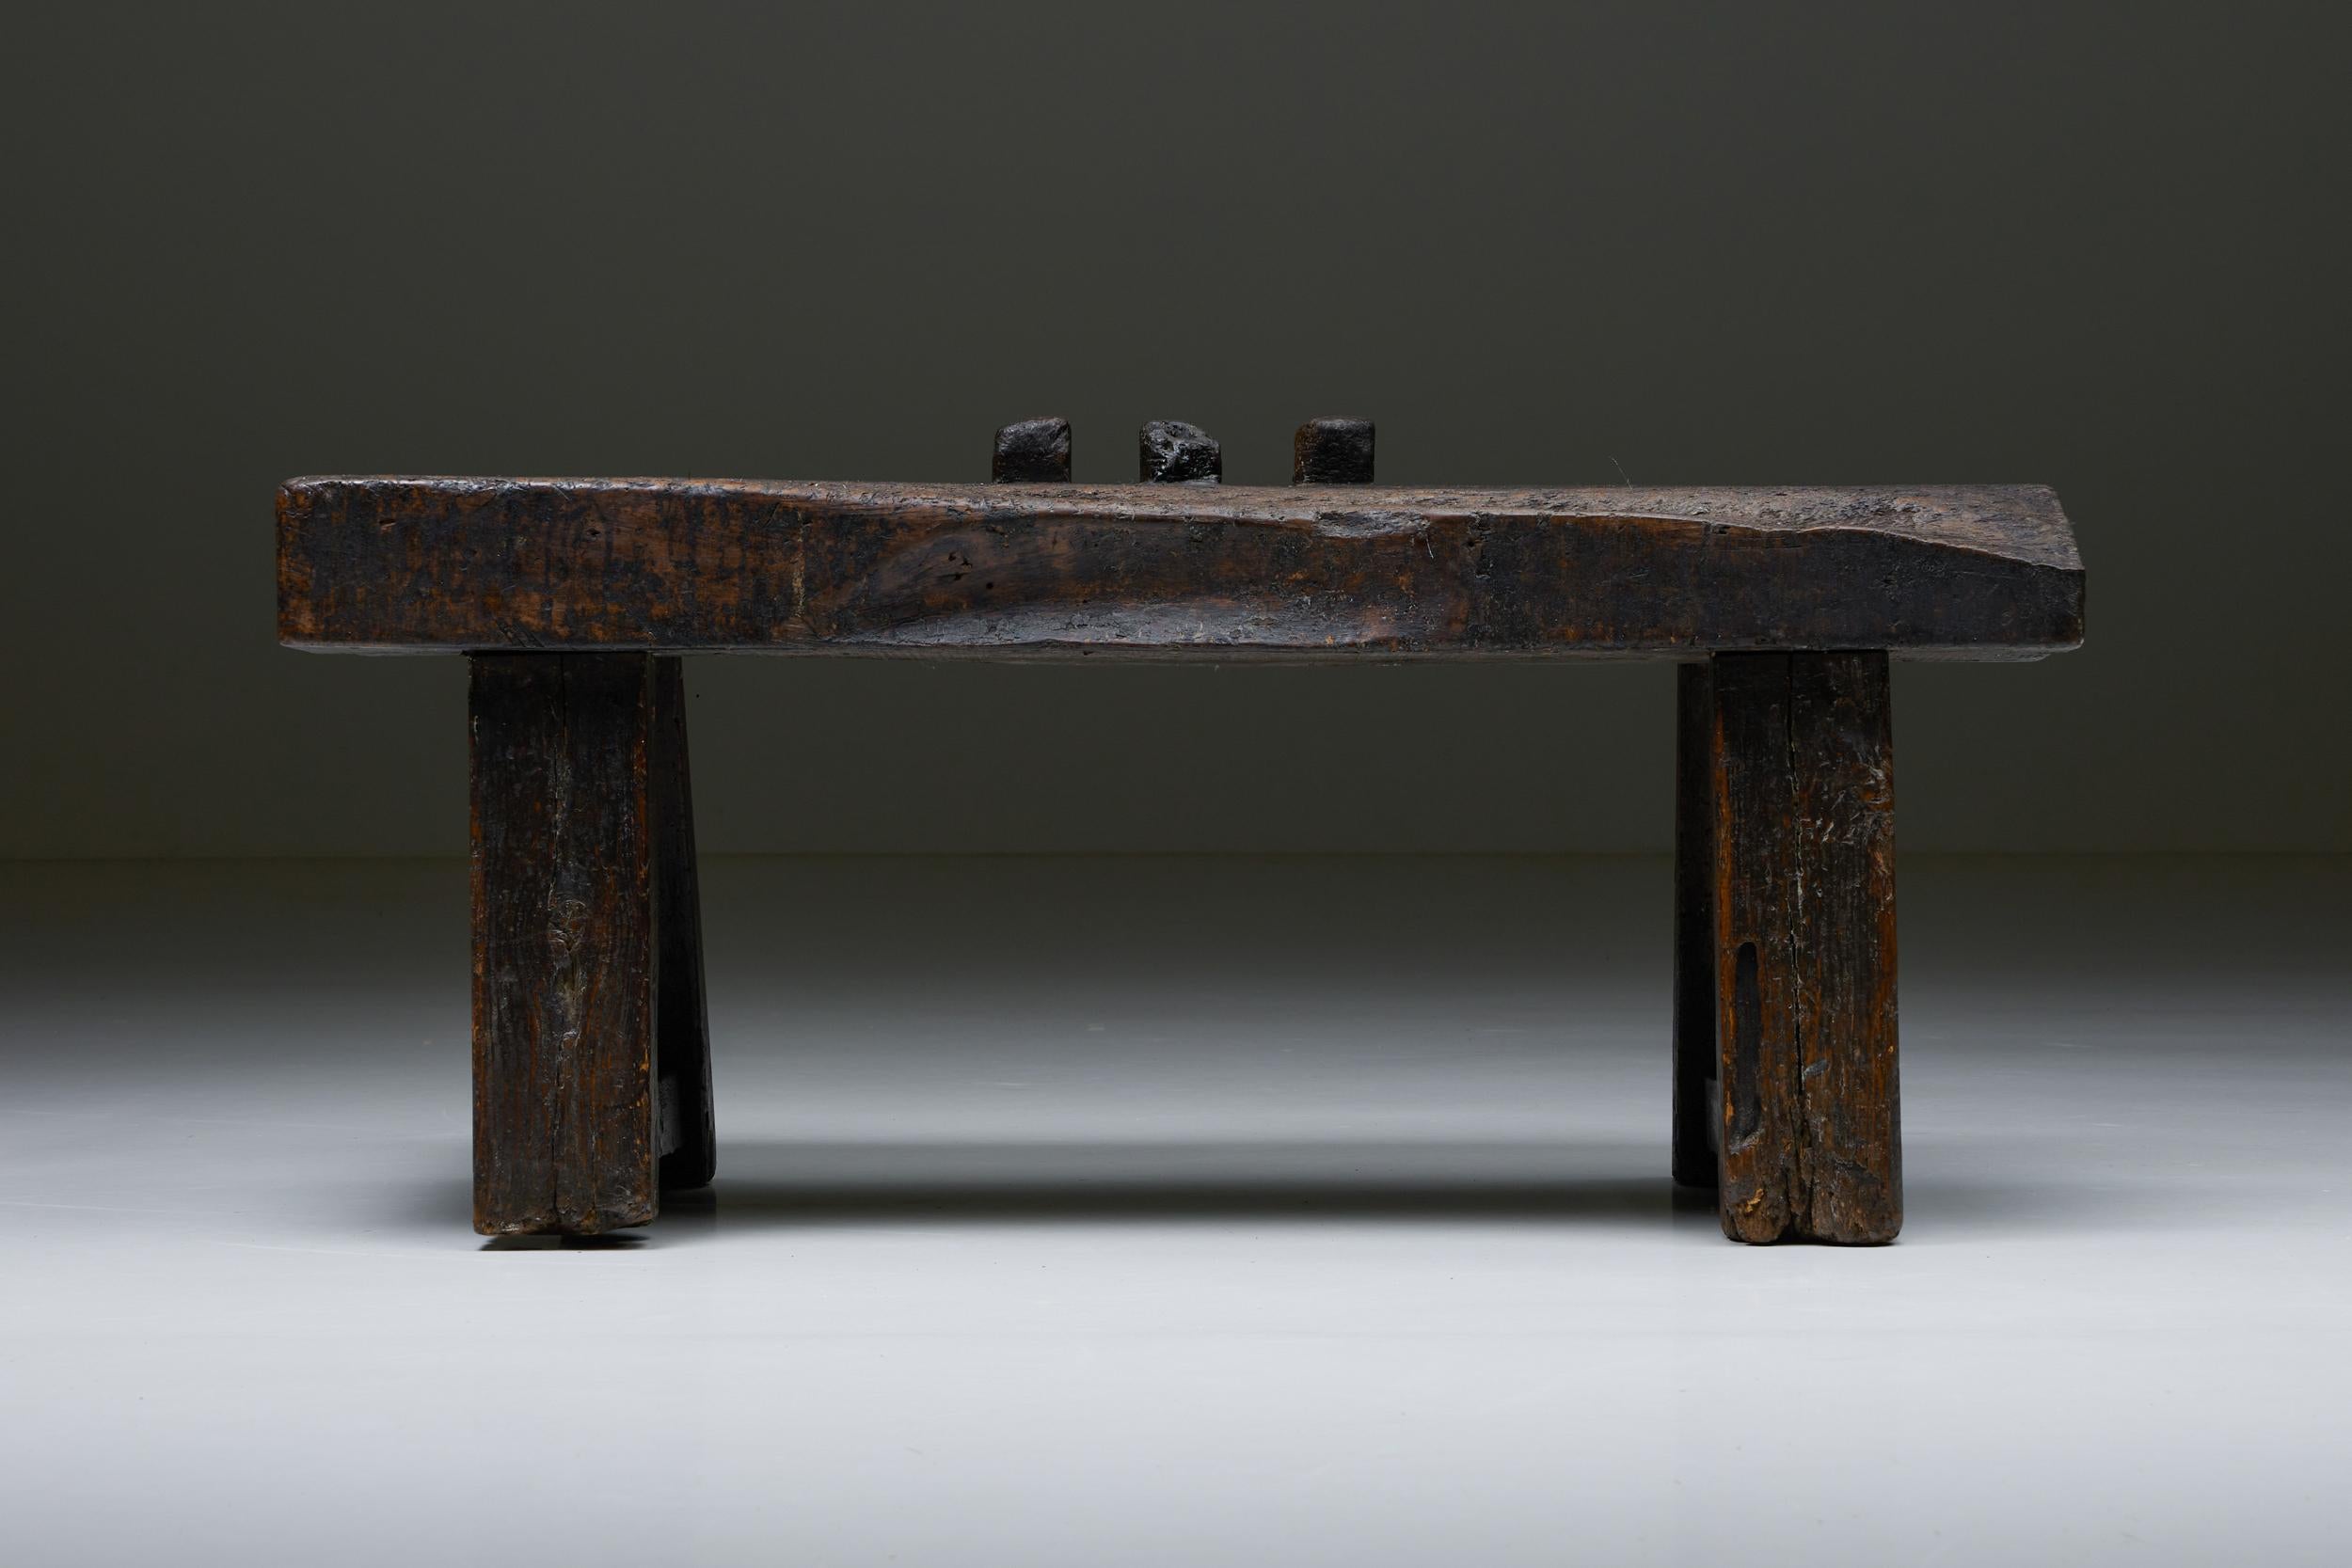 Wabi-Sabi; Rustic; Brutalist; France; Craftsmanship; wooden bench; console table; side table; stool; Display; Oriental

A rustic dark brown versatile piece of furniture. This item can be used as a console table, side table, bench, or to display